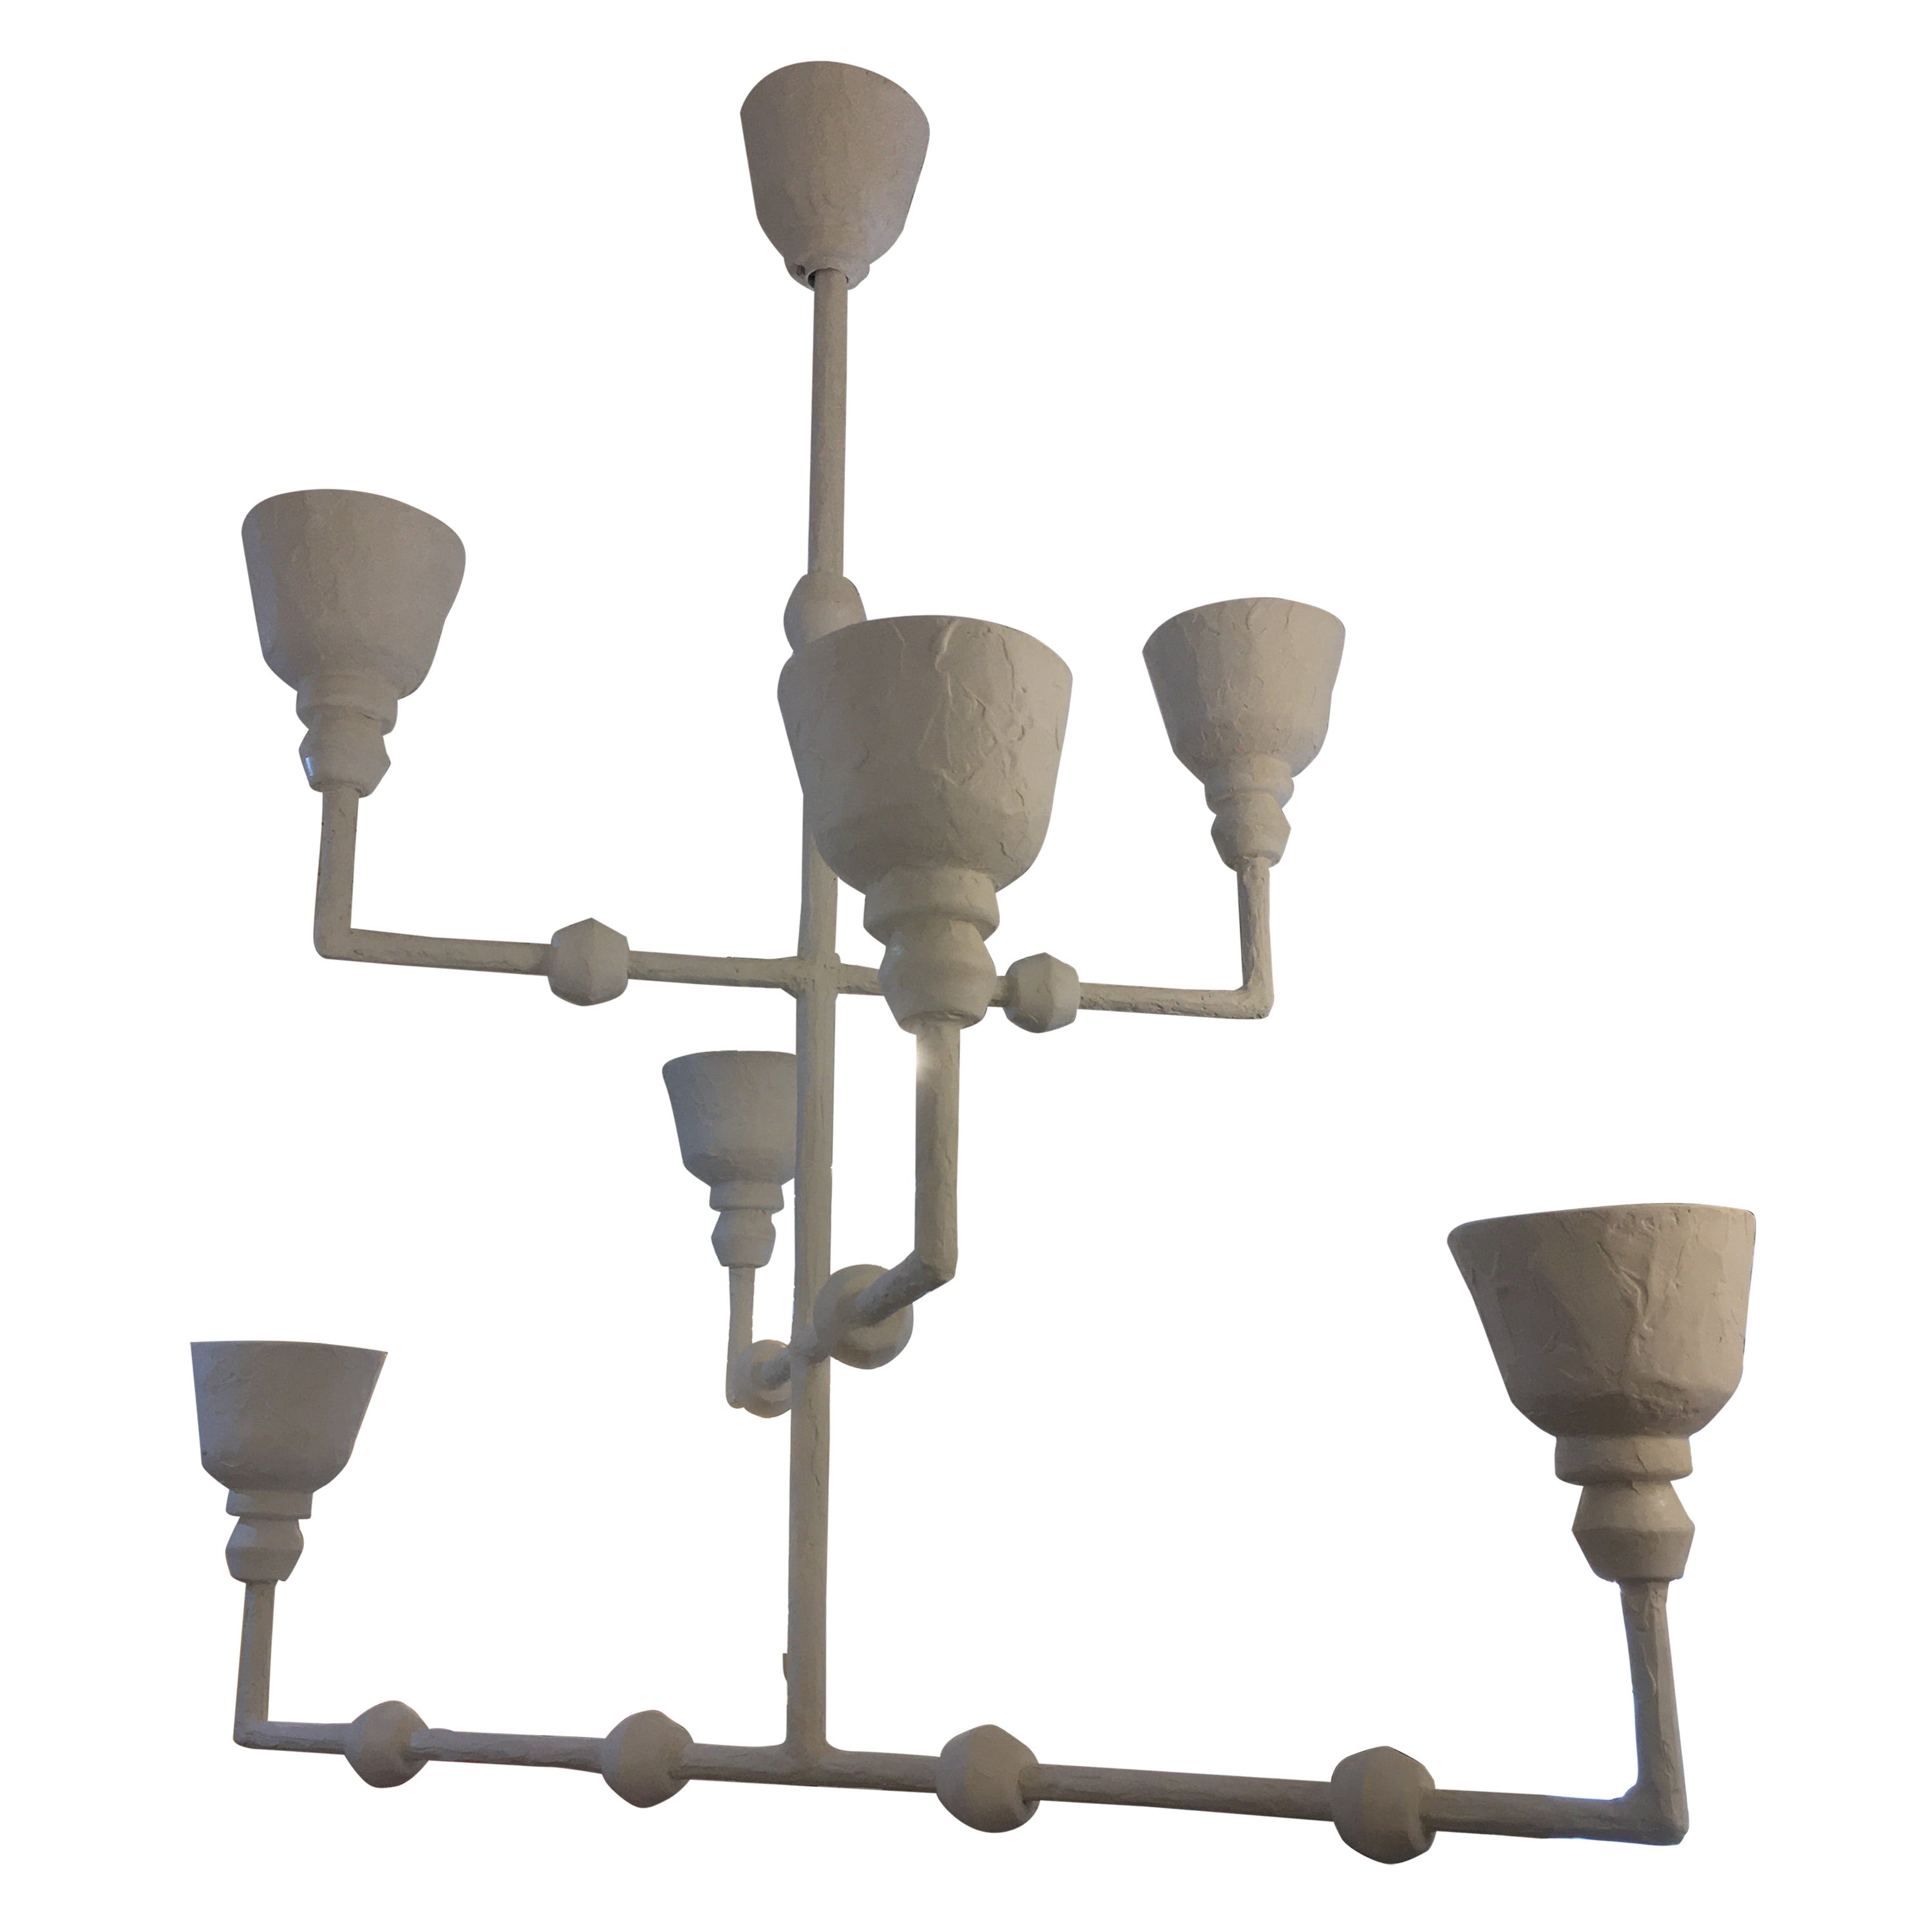 Giacometti Style Plaster Light Fixture, 6 Lights, France